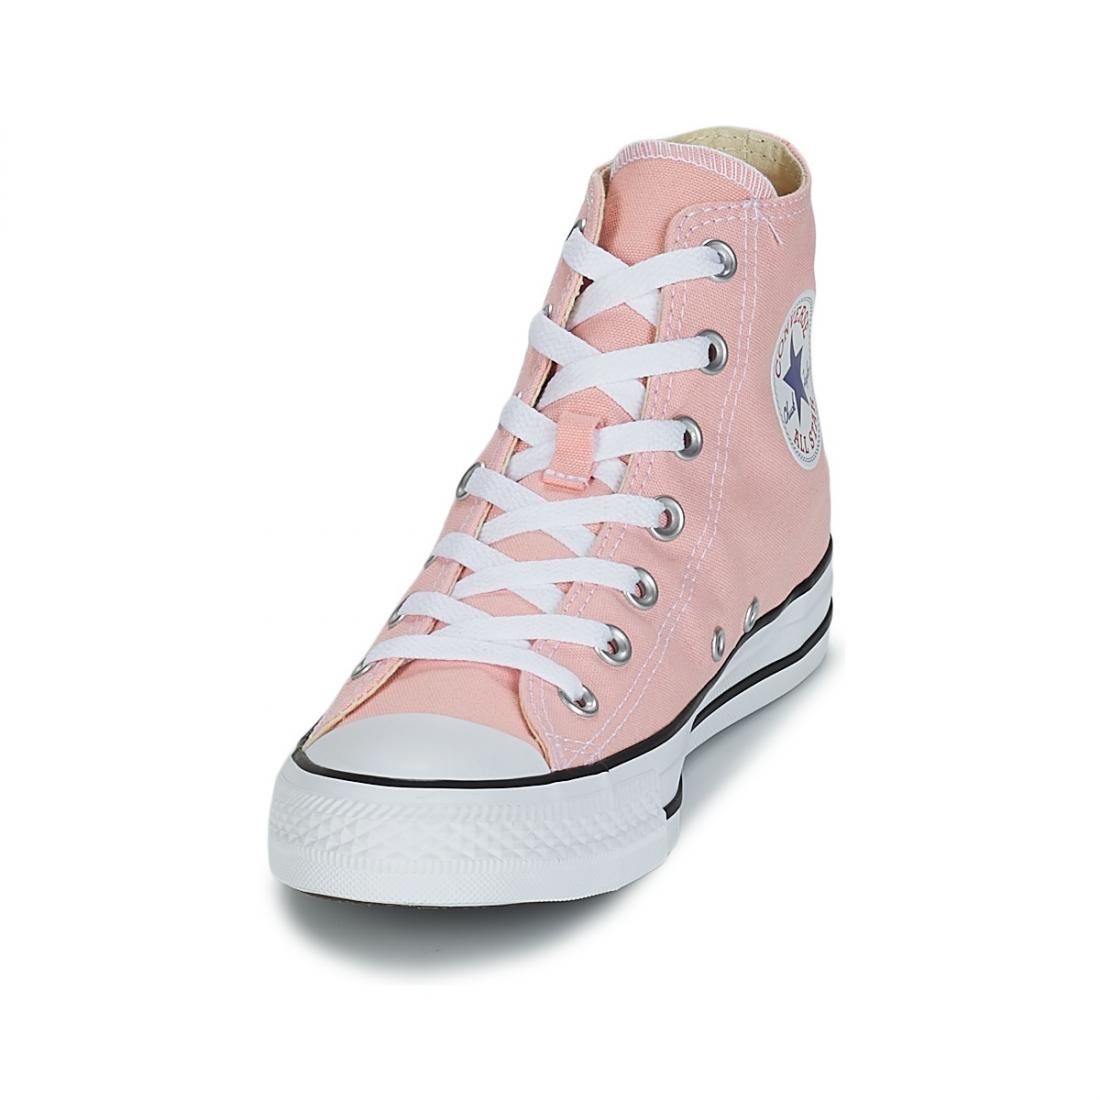 converse chuck taylor 2 homme rose cheap buy online